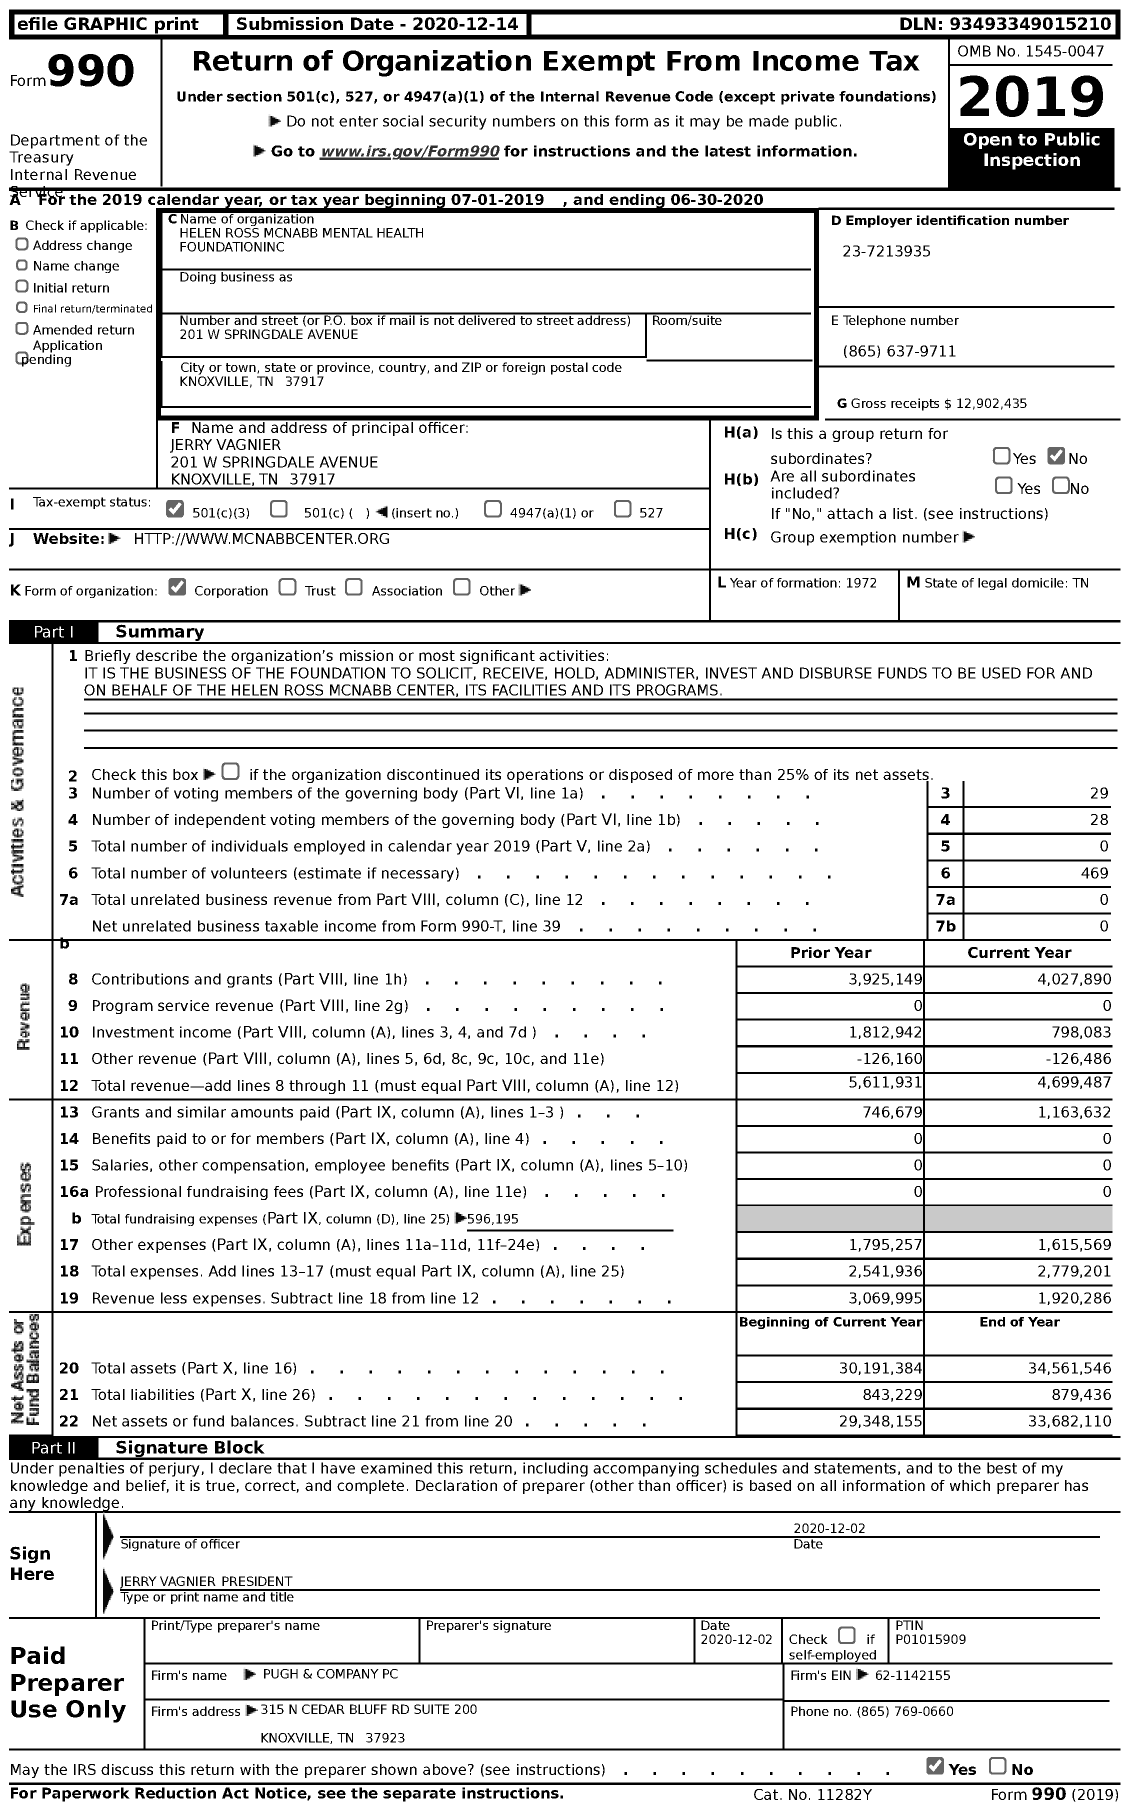 Image of first page of 2019 Form 990 for Helen Ross Mcnabb Foundationinc